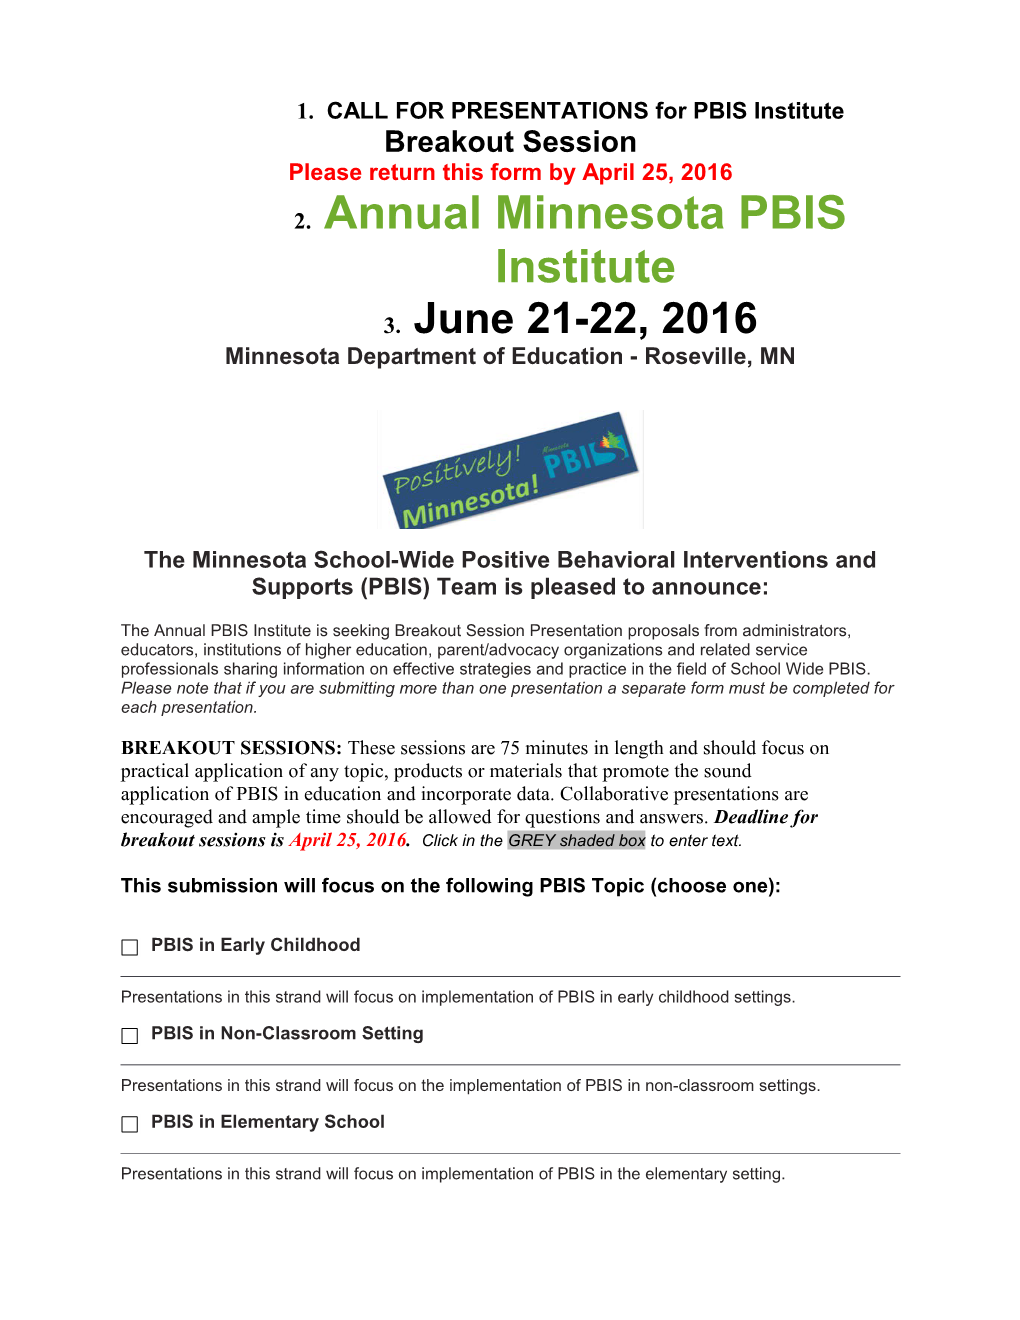 CALL for PRESENTATIONS for PBIS Institute